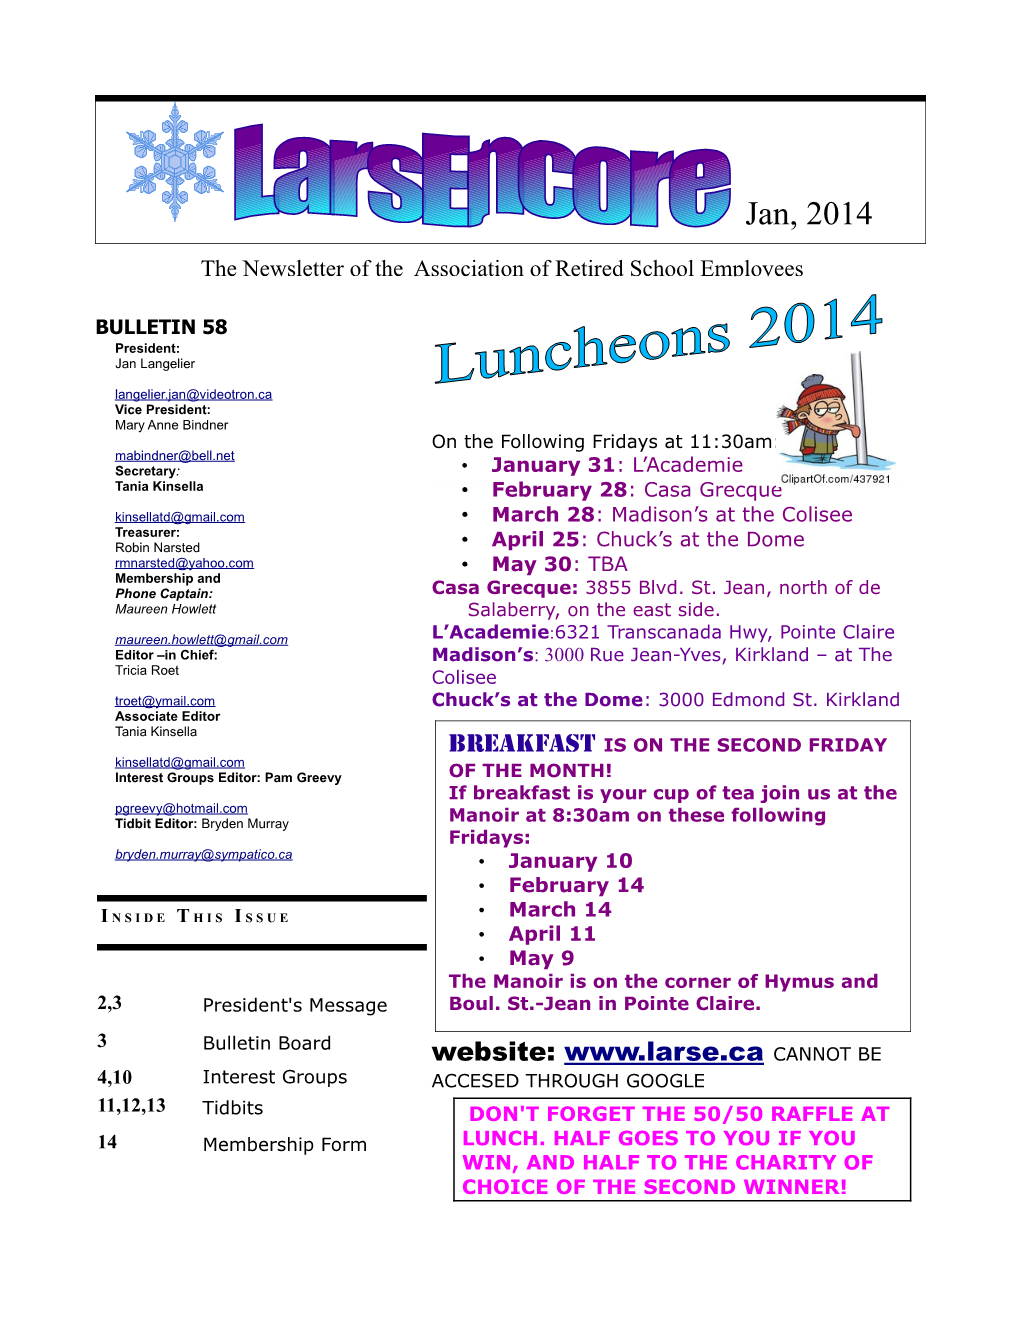 Jan, 2014 the Newsletter of the Association of Retired School Employees